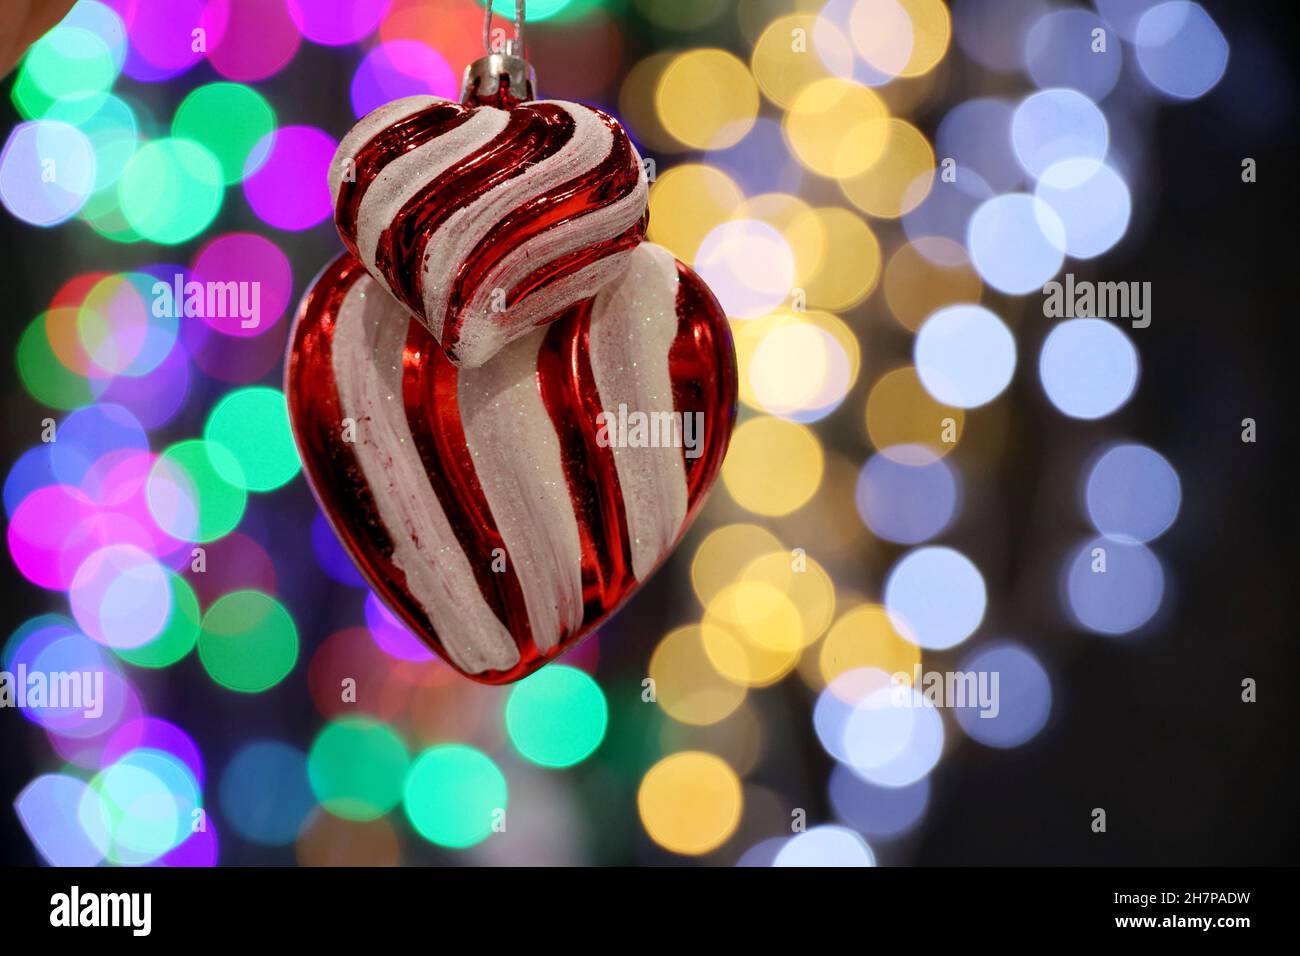 Christmas toys in hearts shape on blurred lights background. New Year decorations and festive illumination Stock Photo